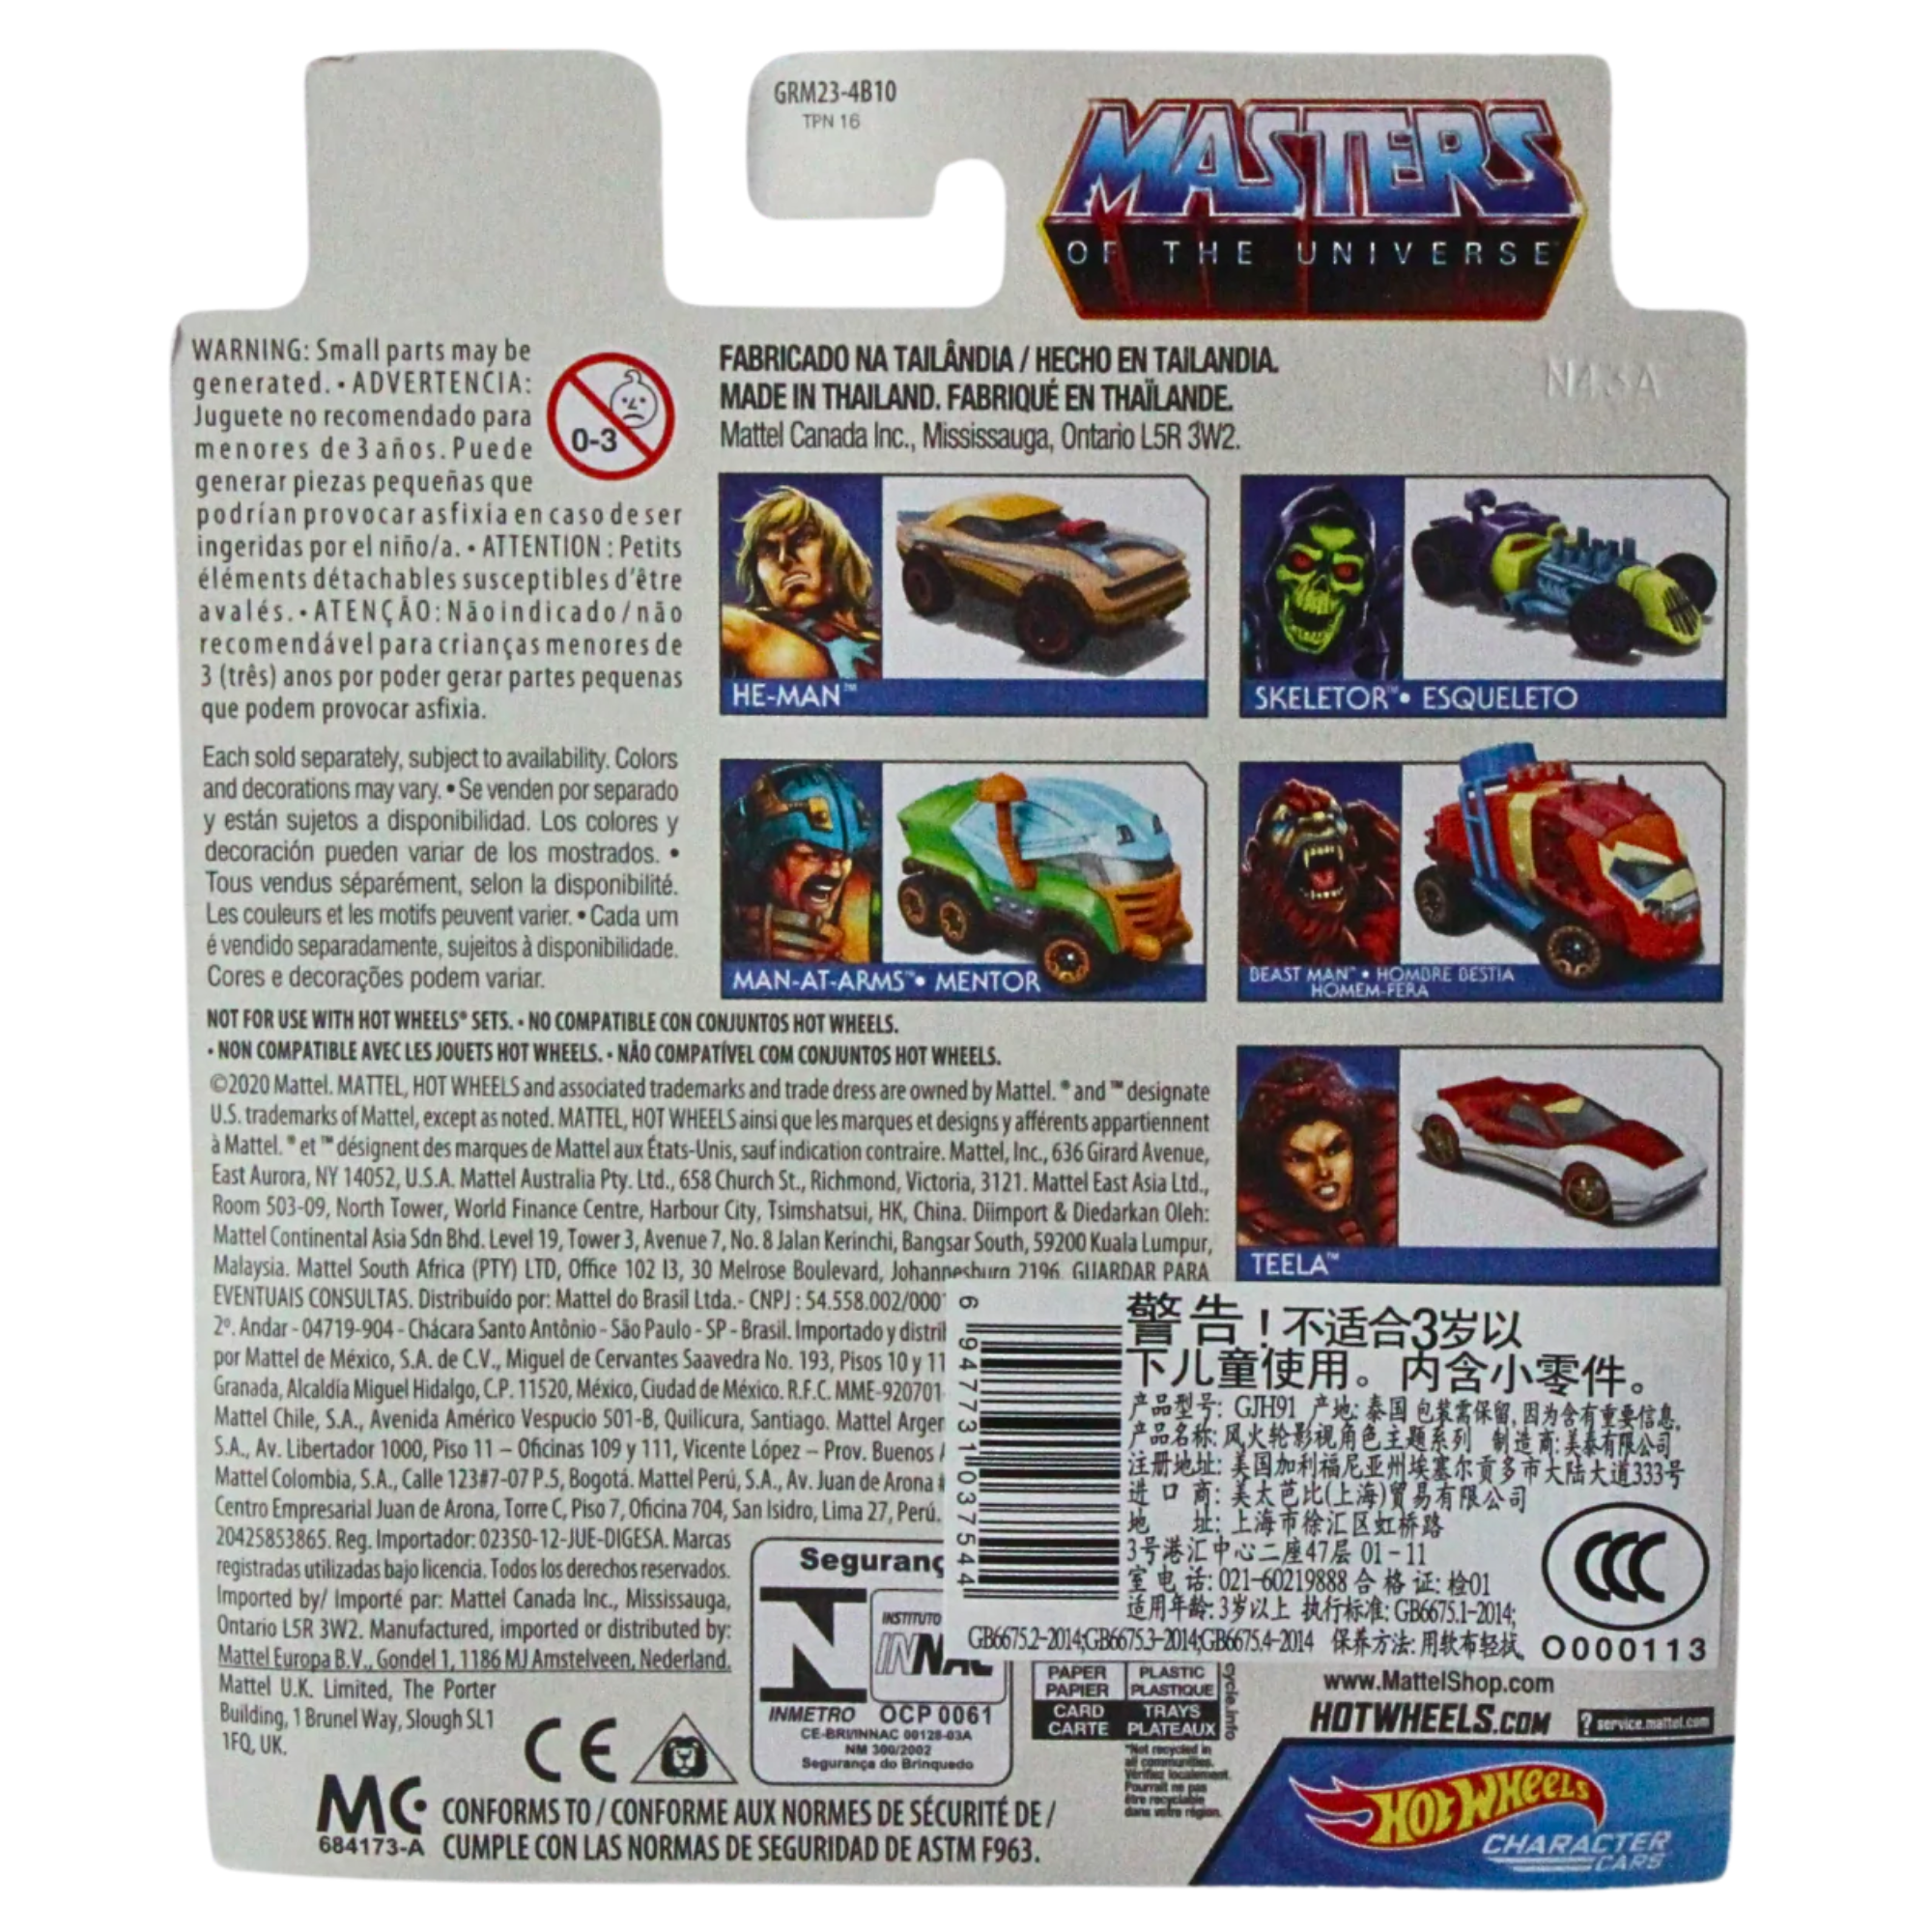 Character Cars Hot Wheels Masters of The Universe Die-cast 1:64 Scale Vehicle Car - He-Man 1/5 - Toptoys2u